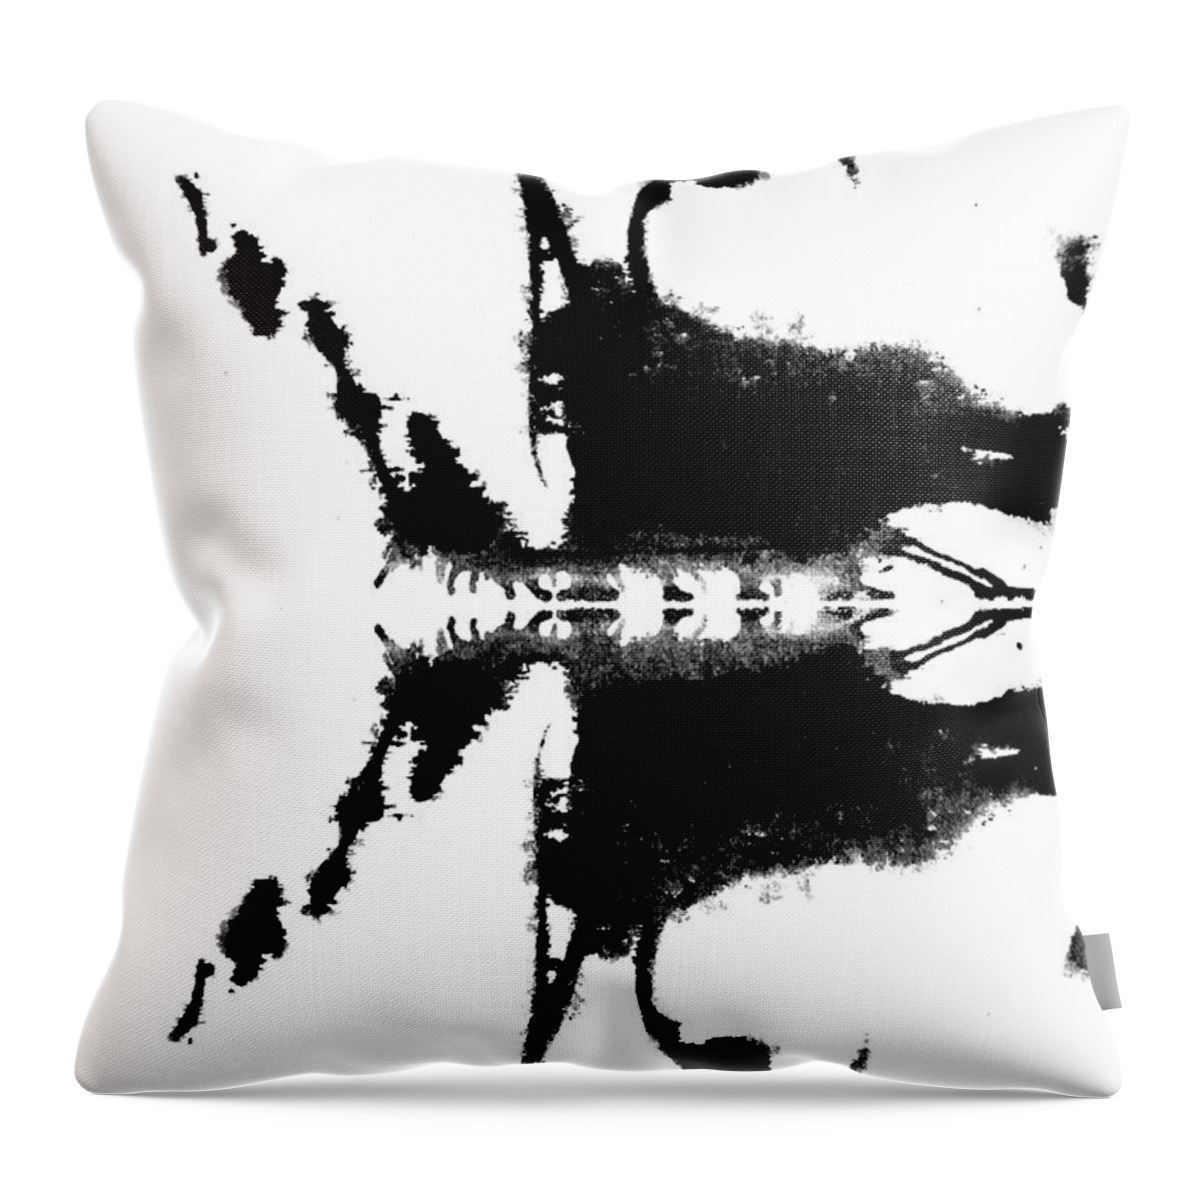 Abstract Throw Pillow featuring the painting Brain Blot No.4 by Stephenie Zagorski